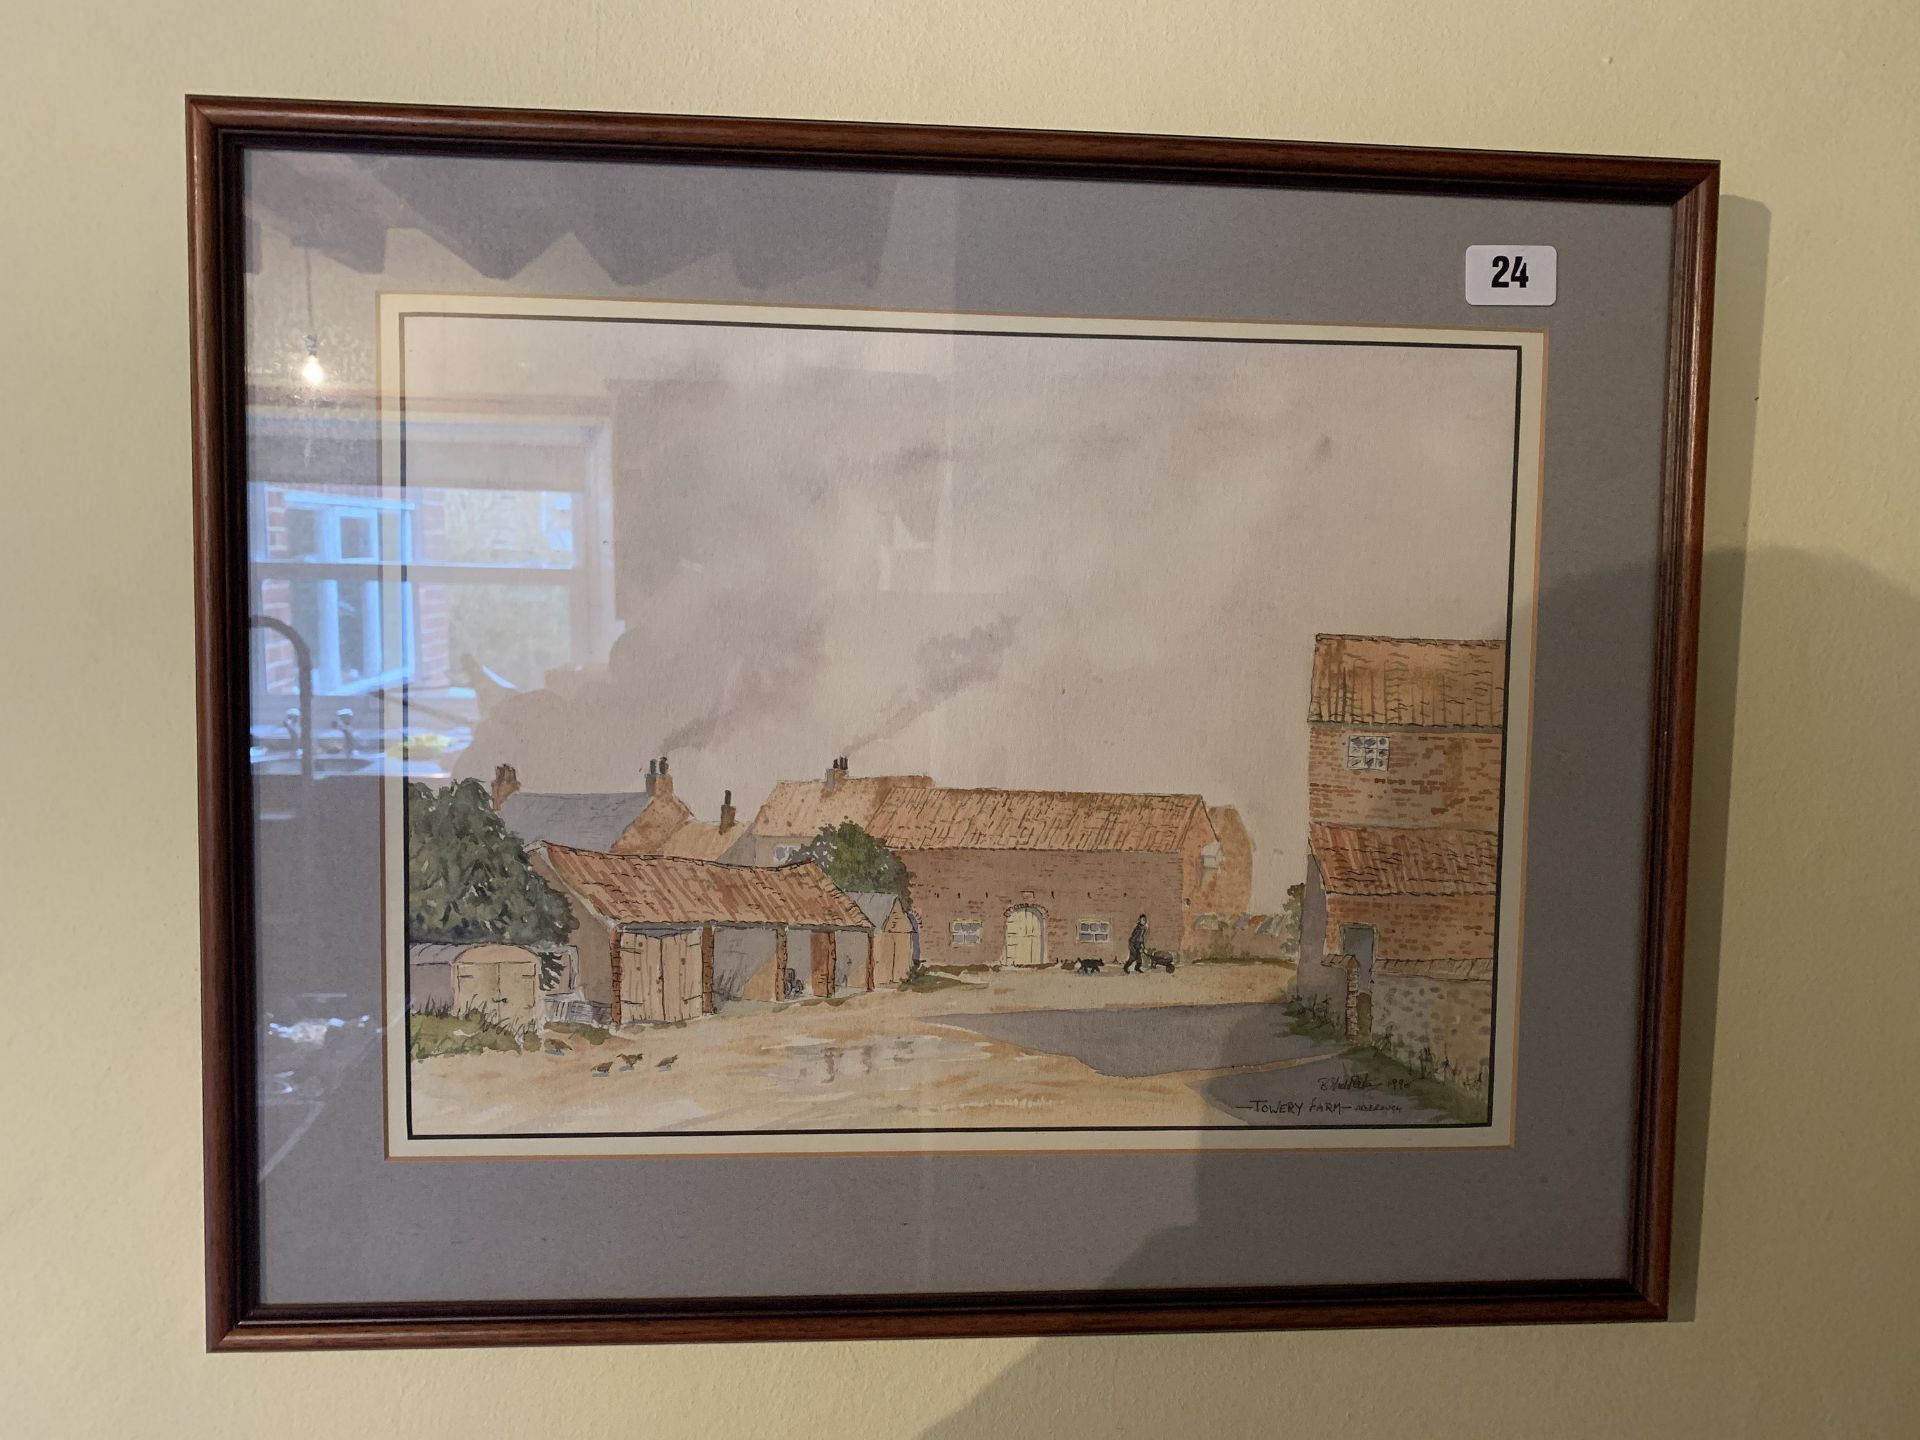 Painting of Towry Farm, Aldbrough by B Middleton, 1990